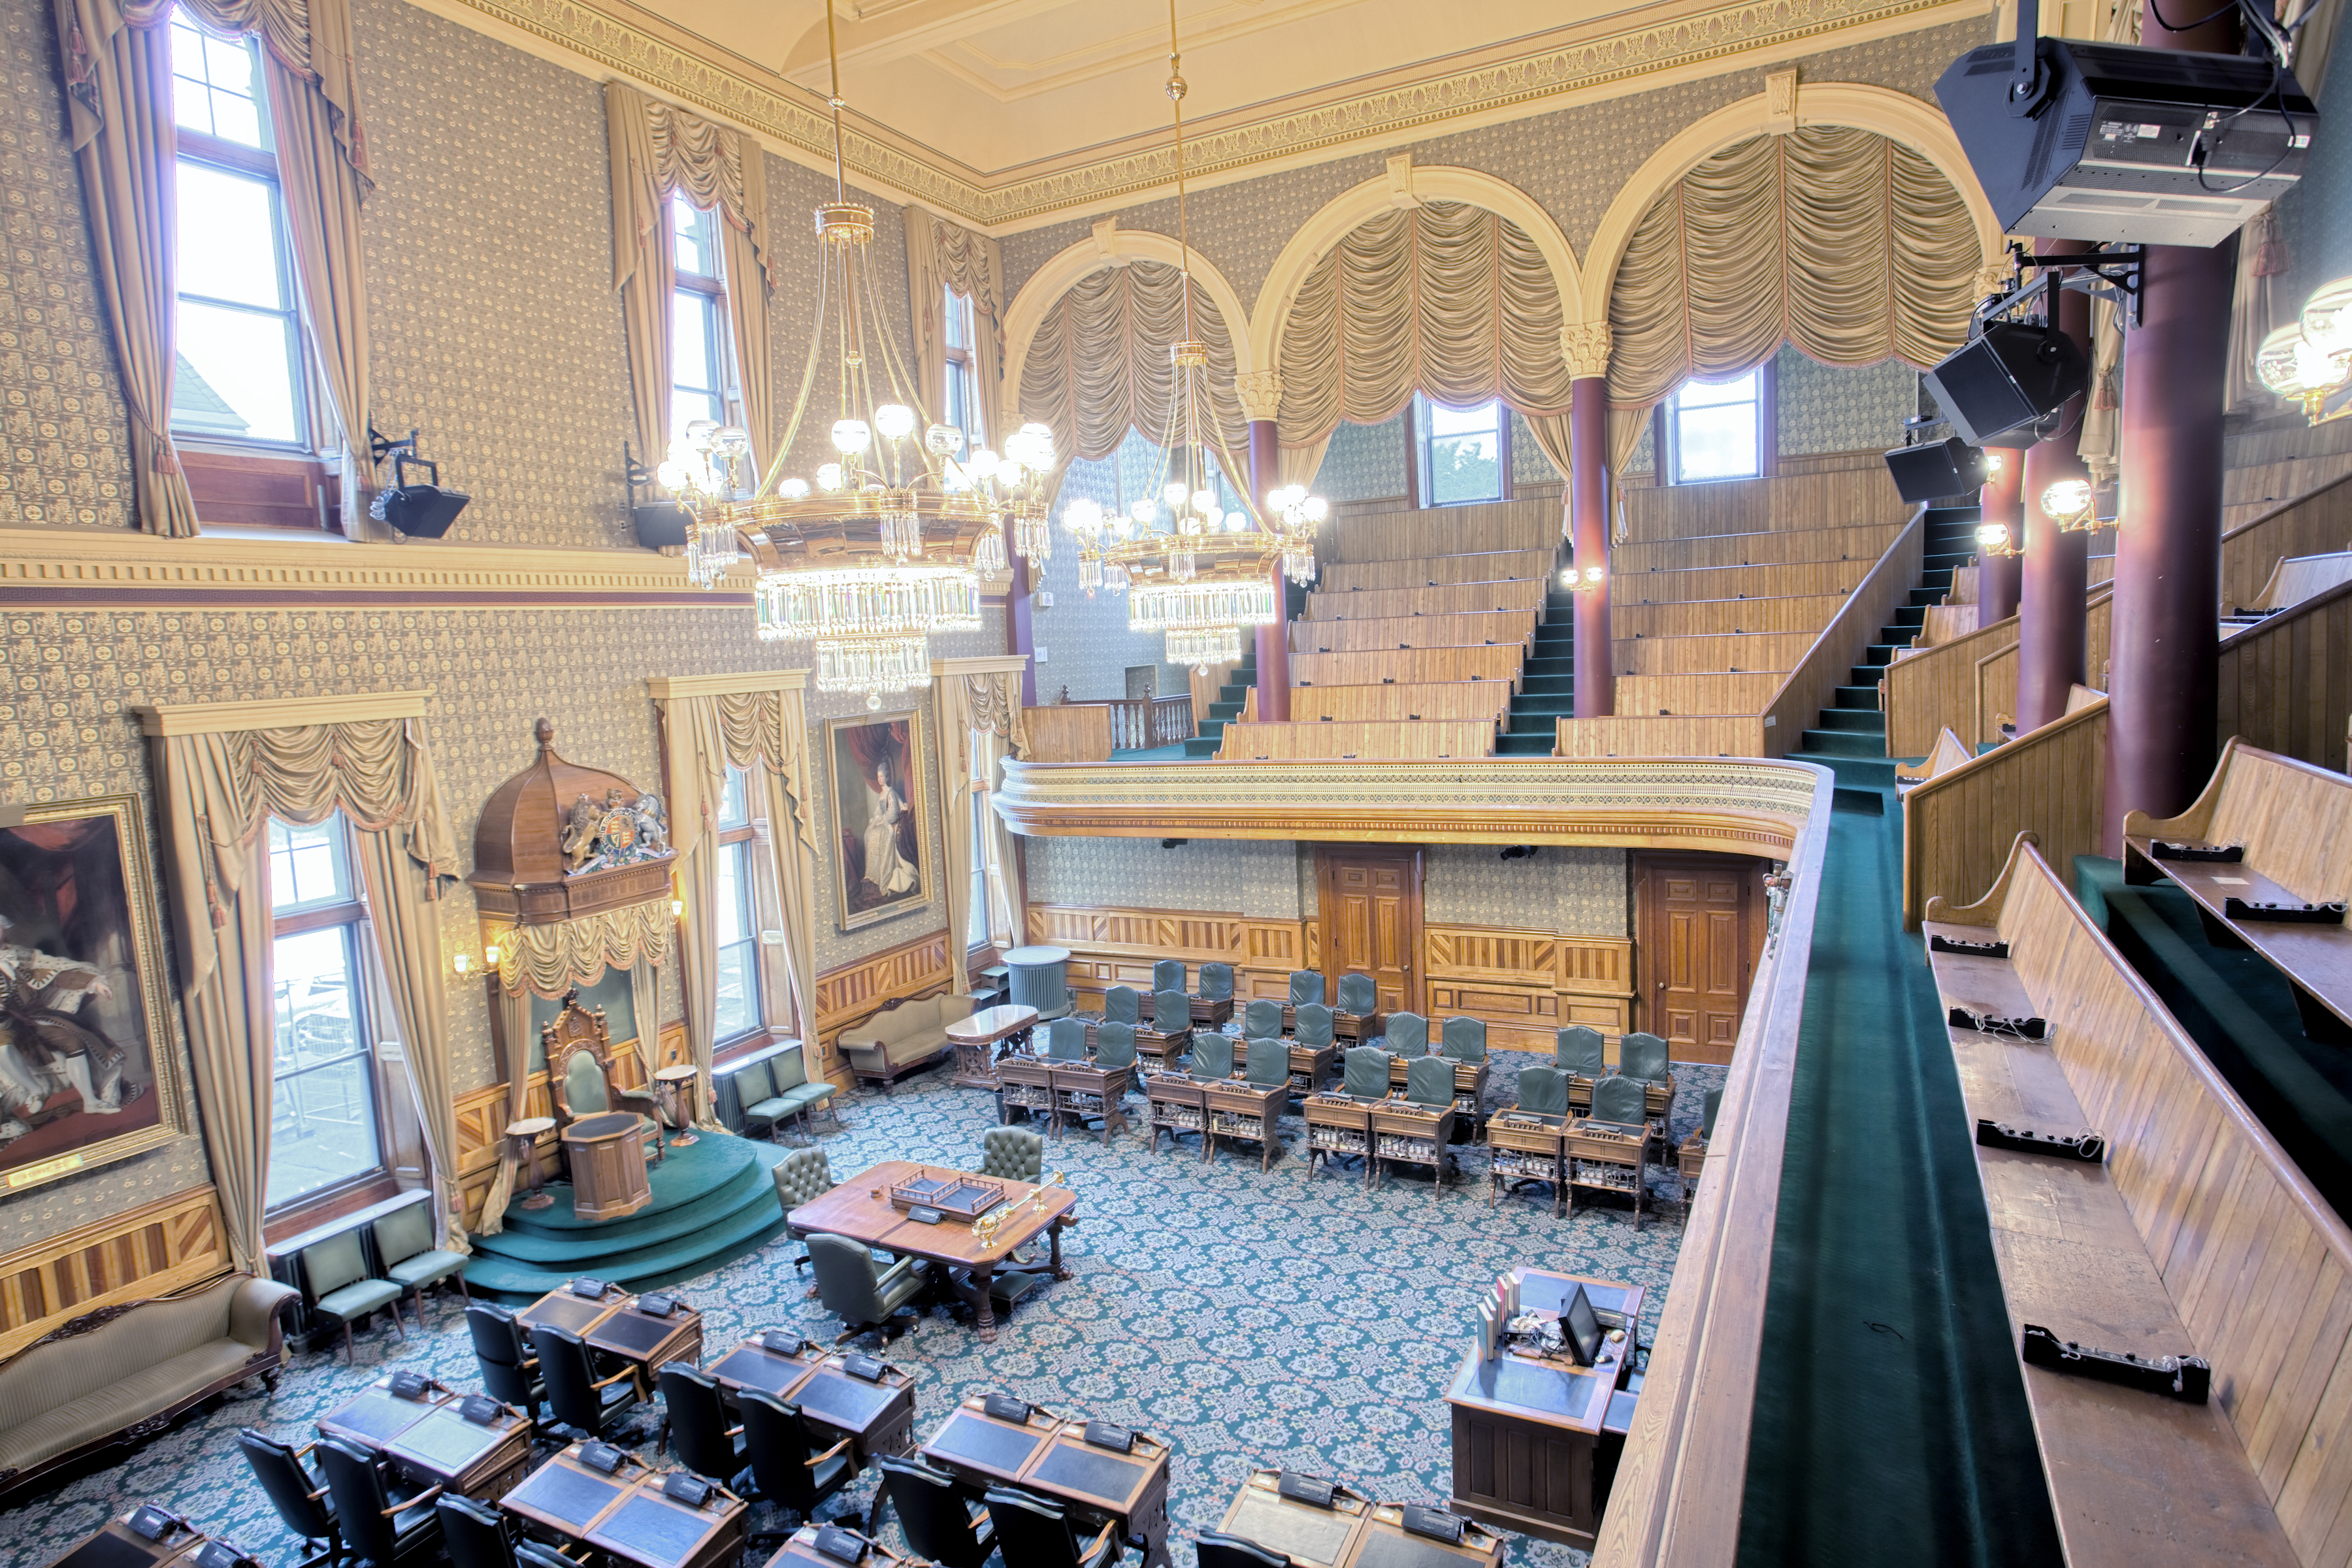 A view of the legislative chamber from the gallery.